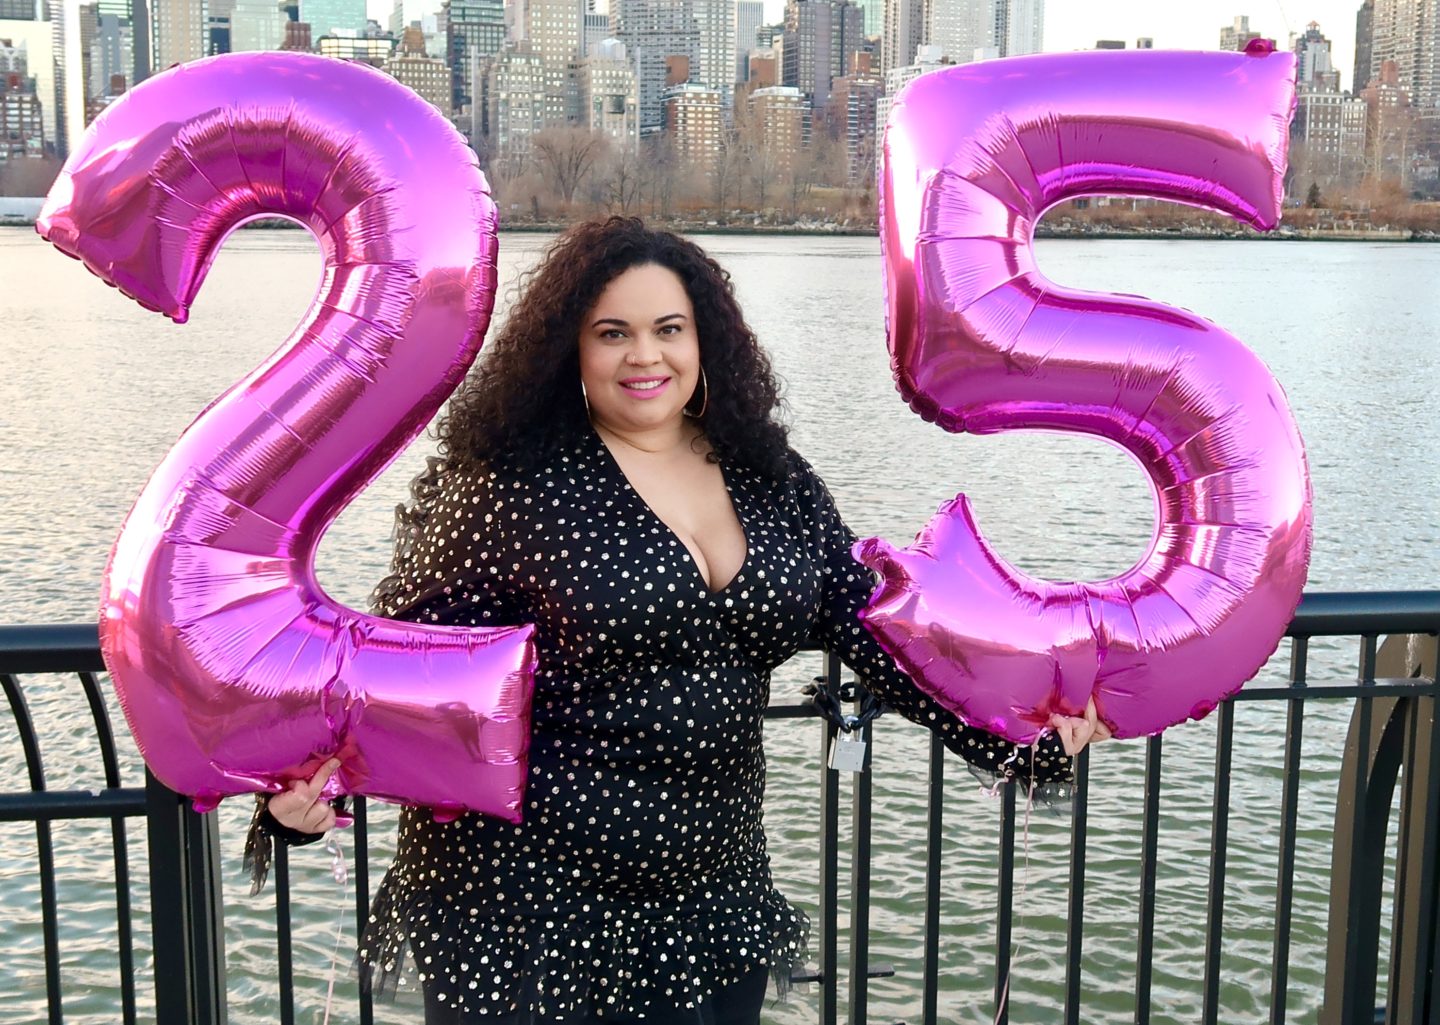 25 Things To Do While I’m 25